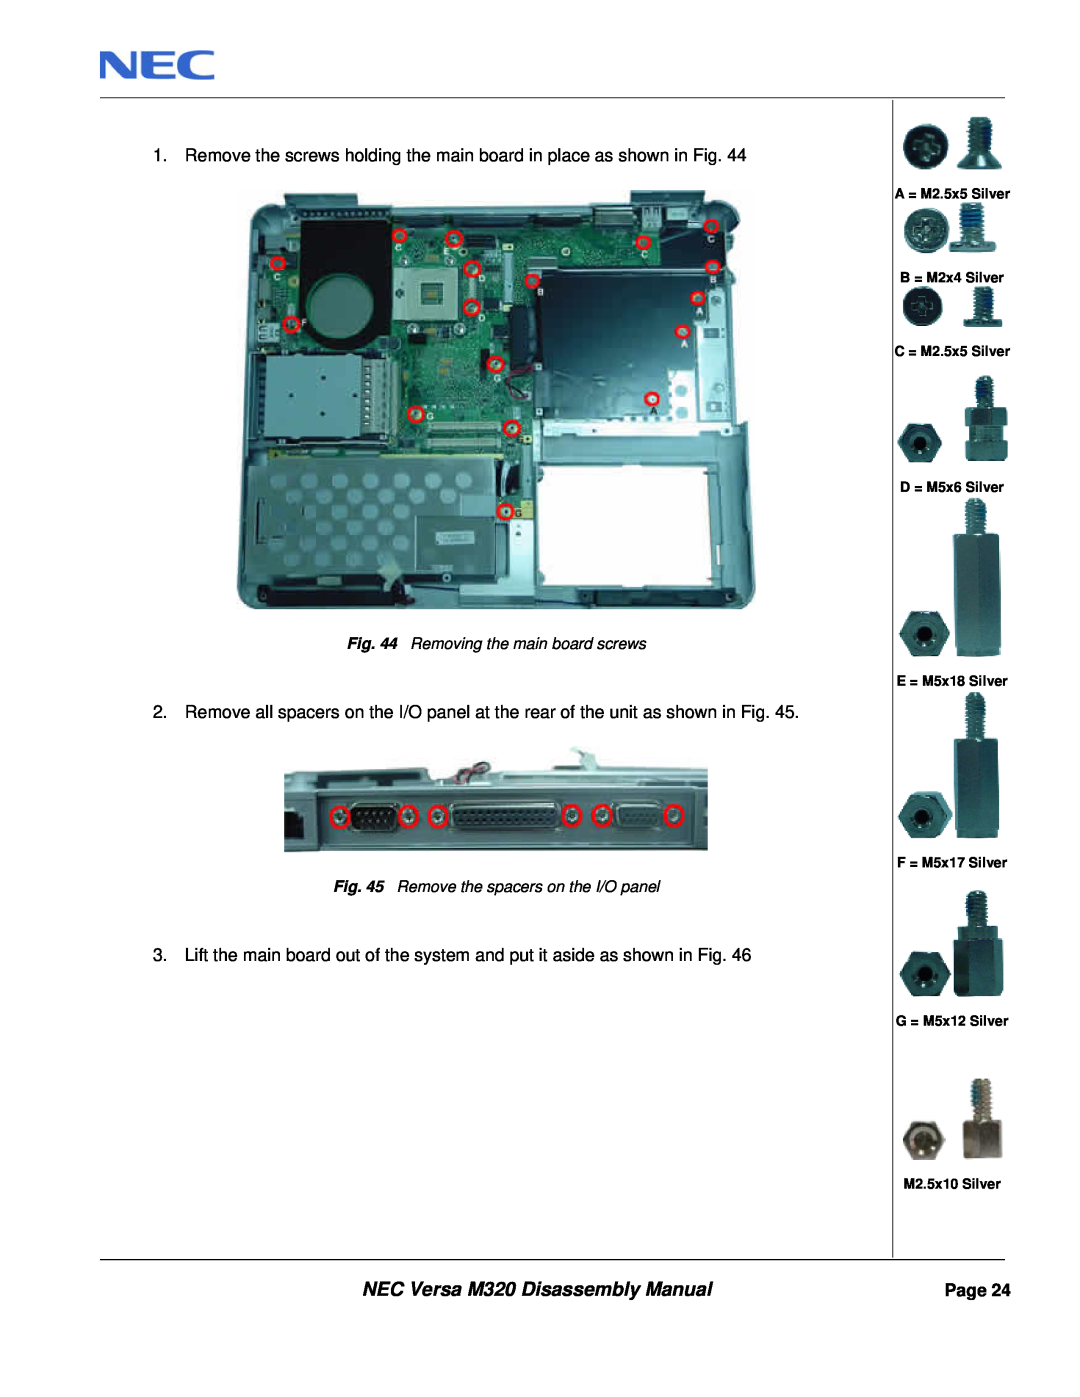 NEC manual NEC Versa M320 Disassembly Manual, Removing the main board screws, Remove the spacers on the I/O panel 